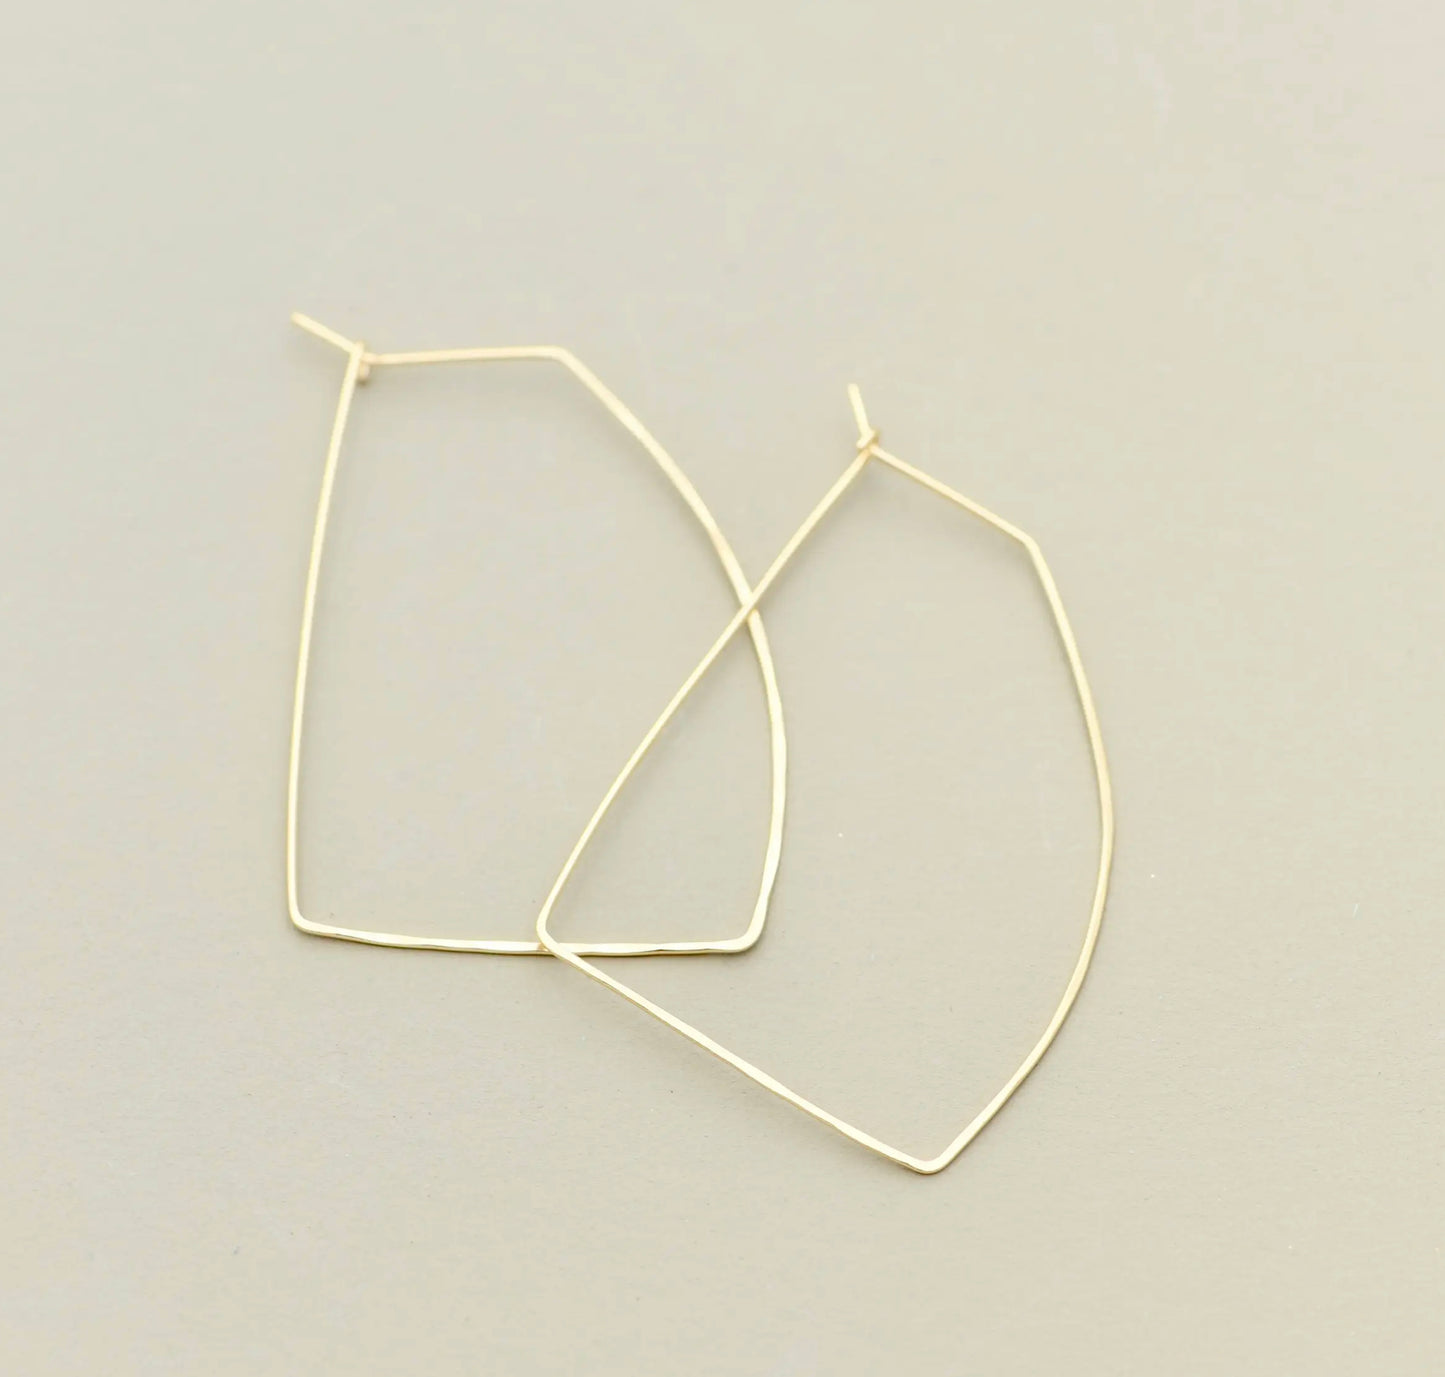 Boxy hoop earrings Made in United States by Britta Ambauen 